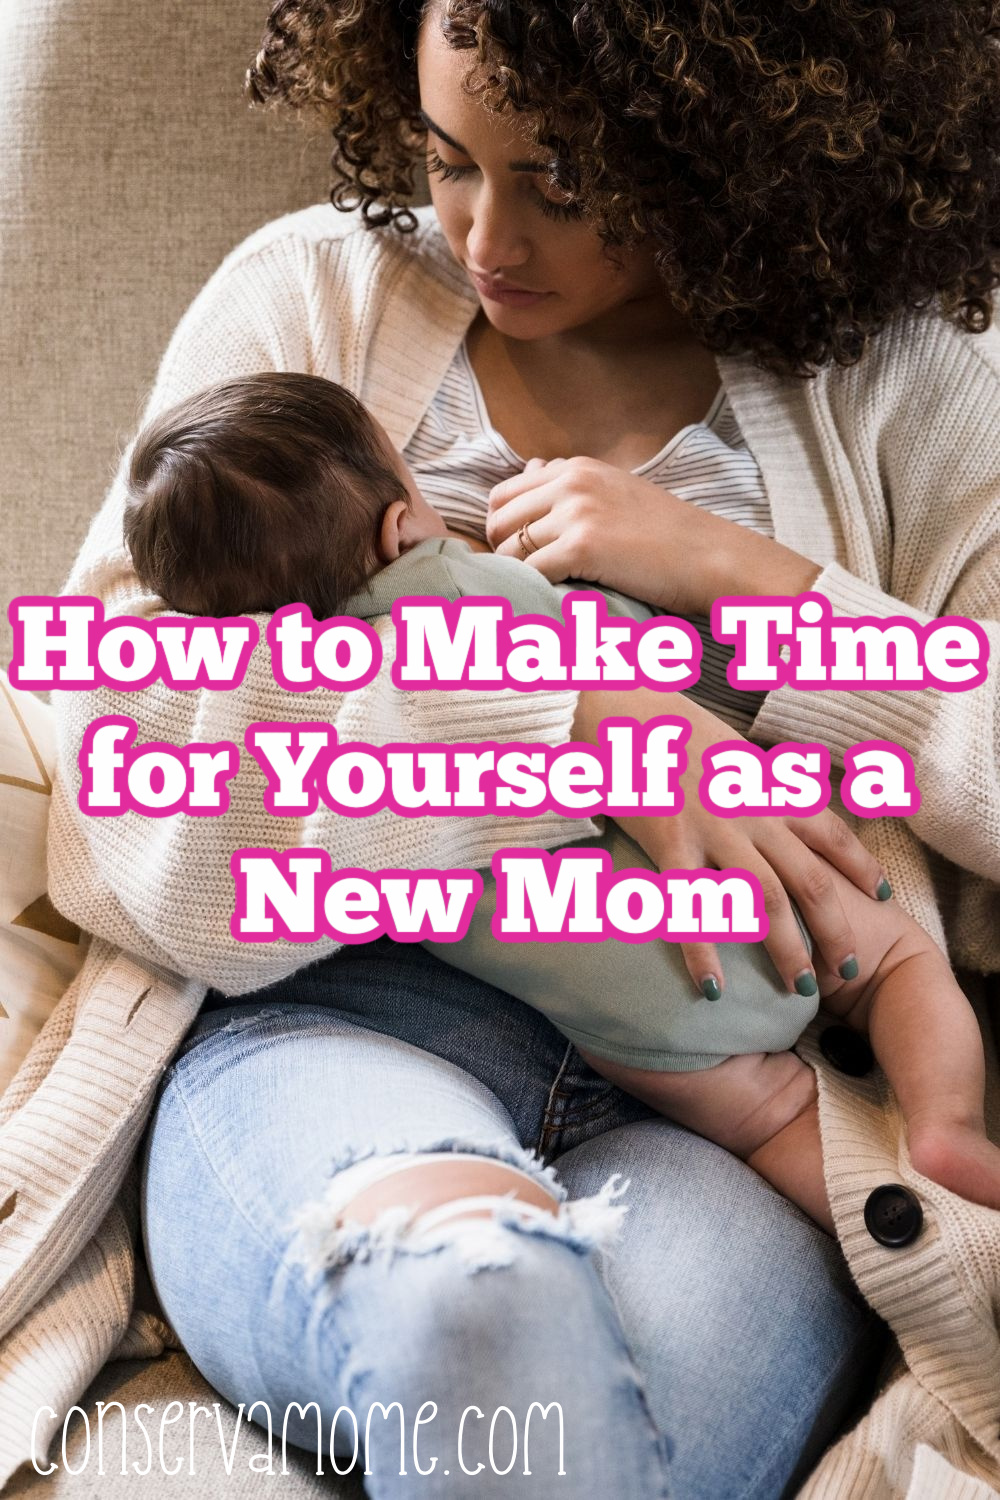 How to Make Time for Yourself as a New Mom